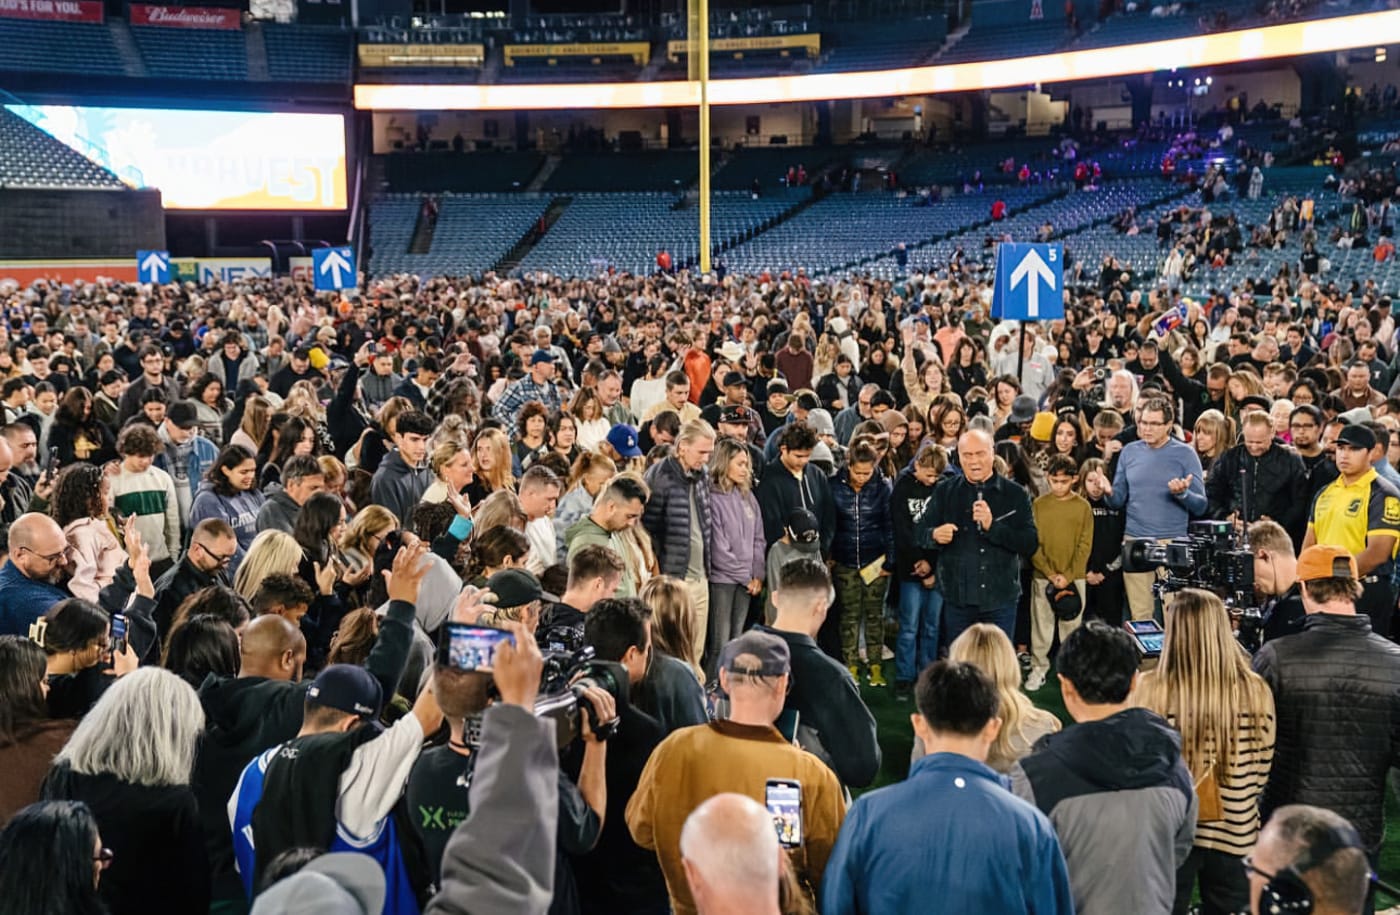 This weekend, SoCal Harvest returned to Angel Stadium and hosted over 210,000 attendees with more than 8,600 people making professions of faith.